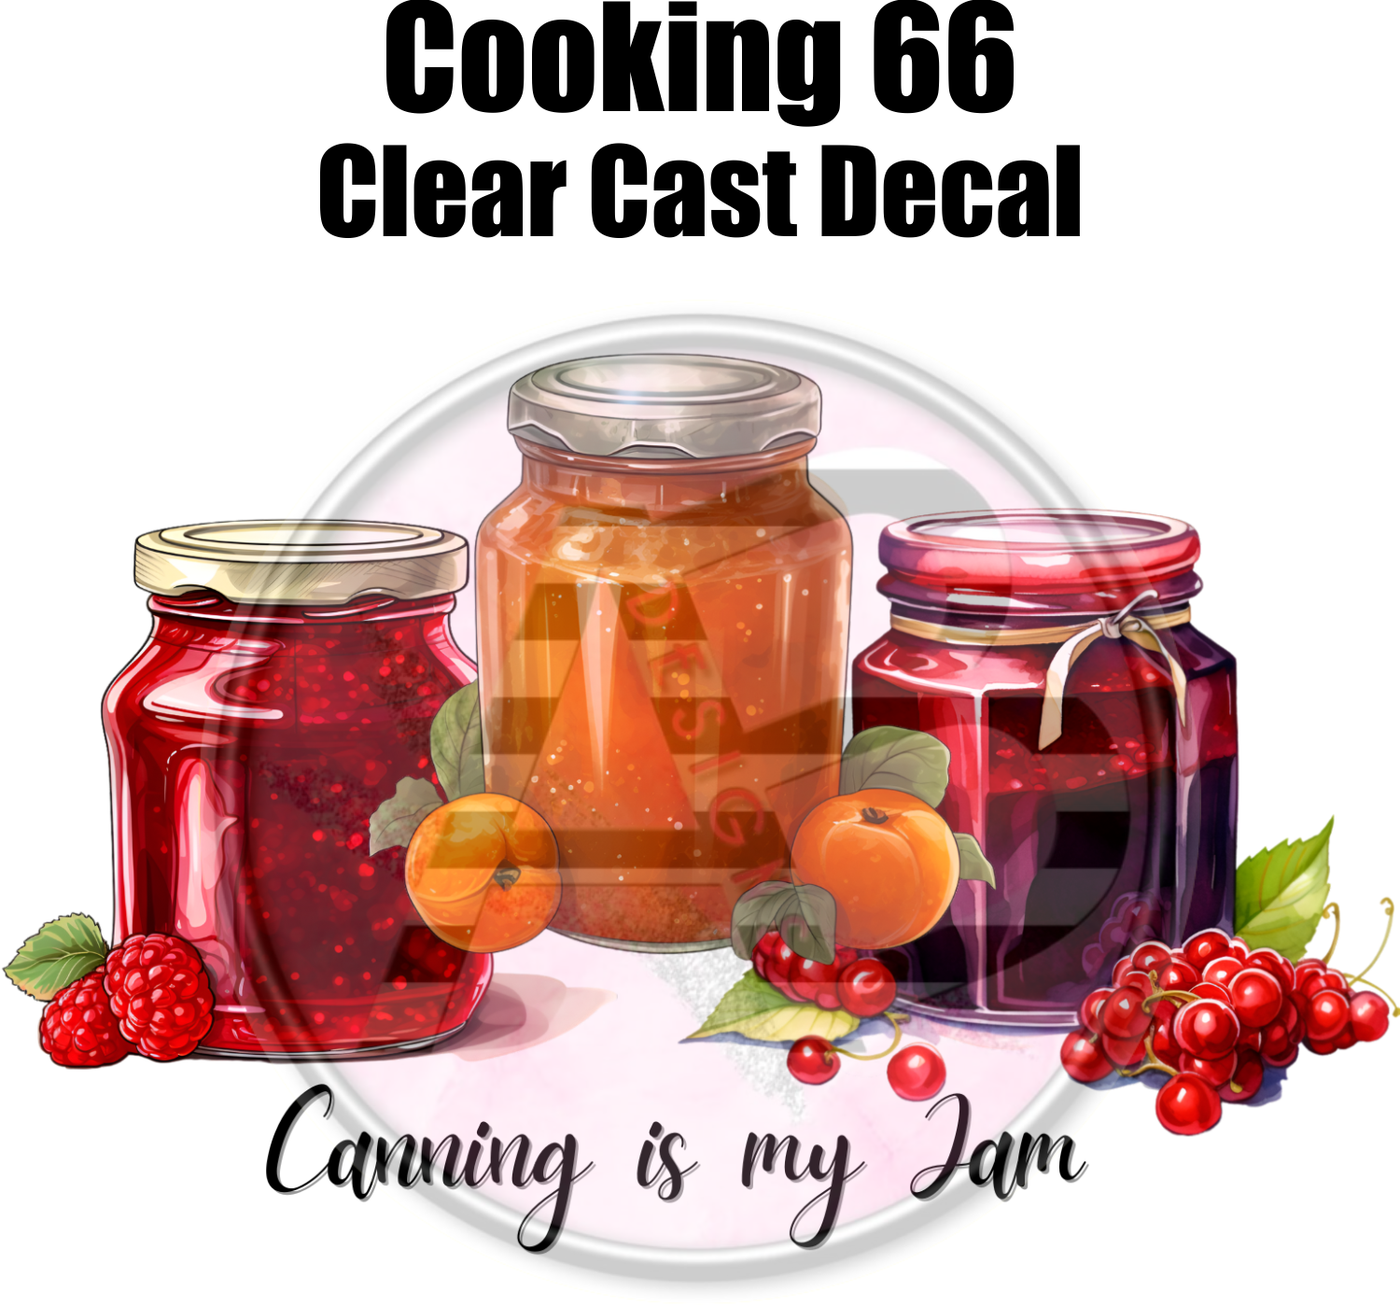 Cooking 66 - Clear Cast Decal - 293